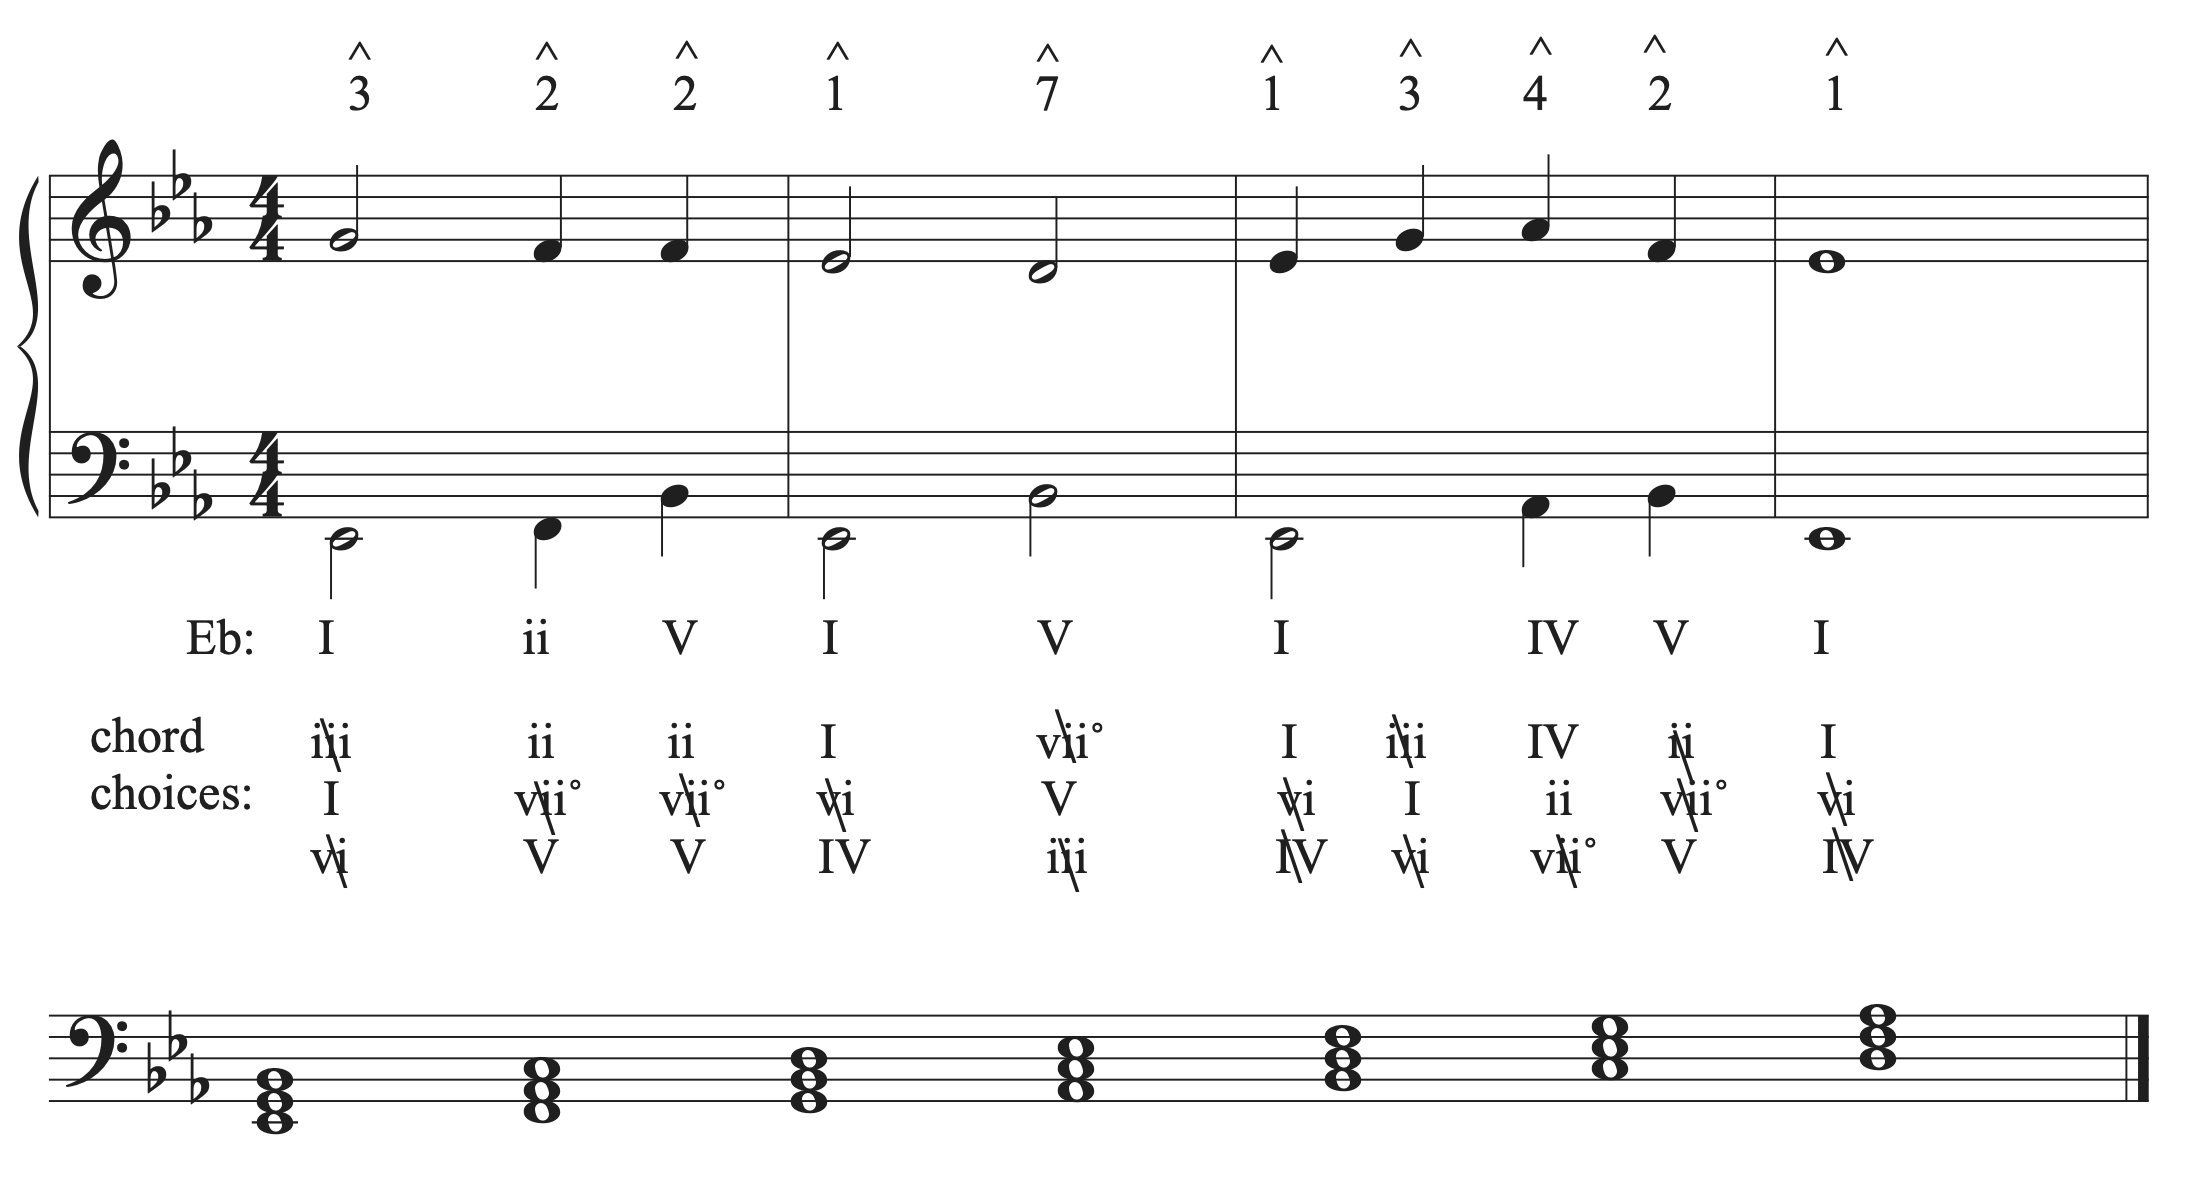 The musical example in E-flat major with a chord progression chosen and bass pitches added.